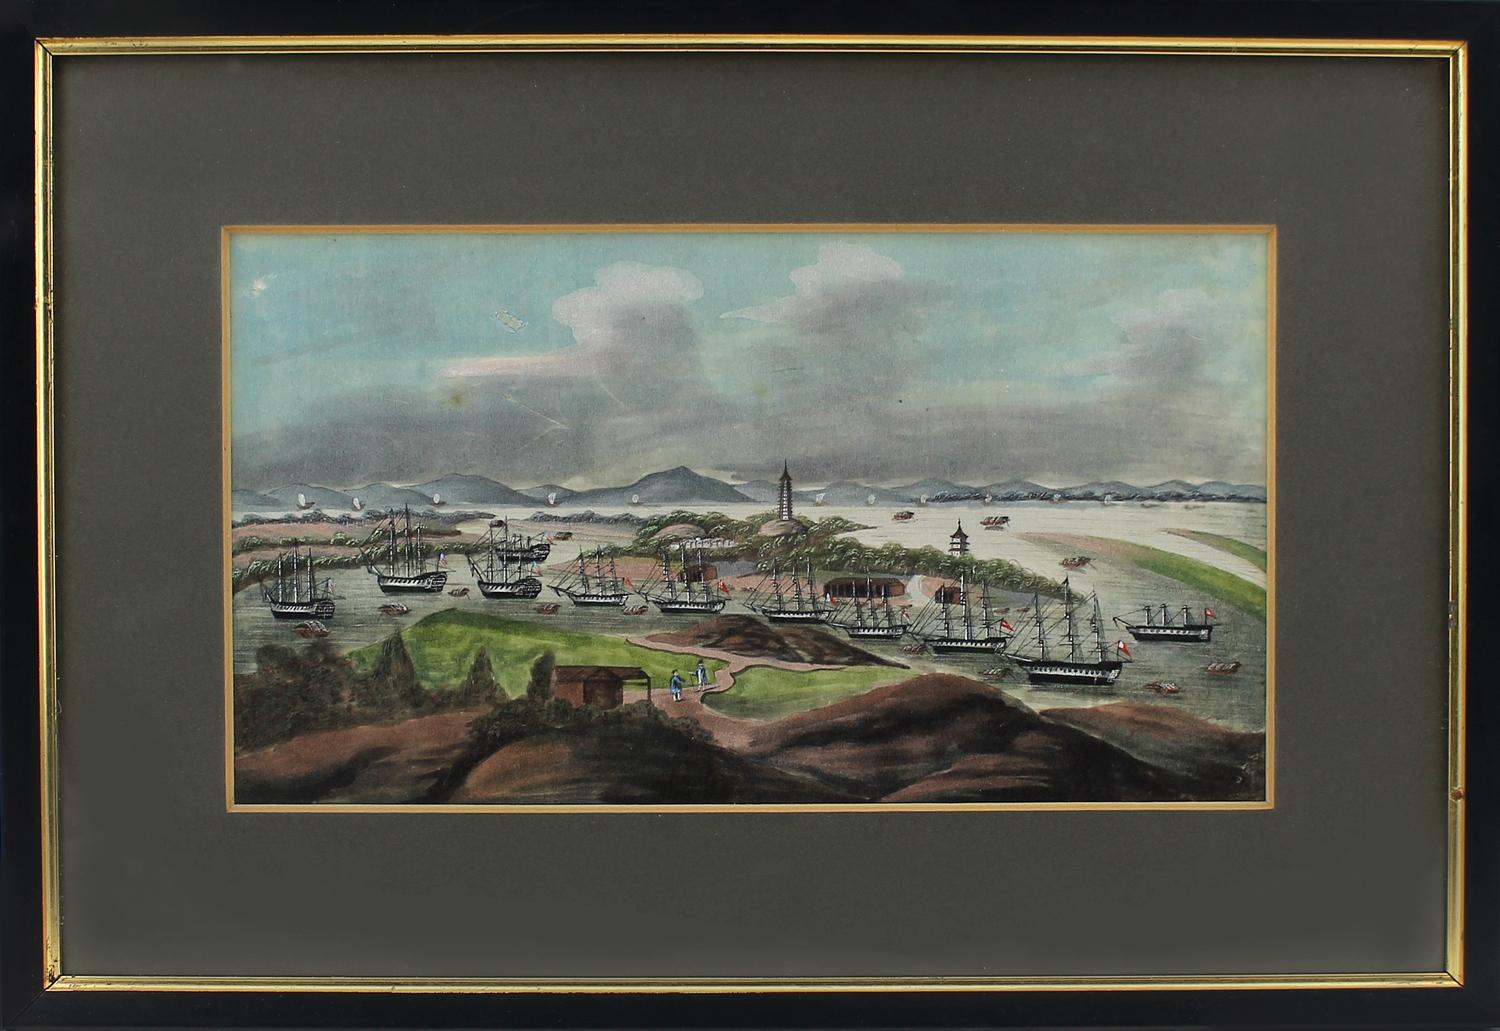 Four China Coast watercolours on pith paper, circa 1845, unsigned
1. Canton with American and French factories showing the American garden and the waterfront, size 6 1/4